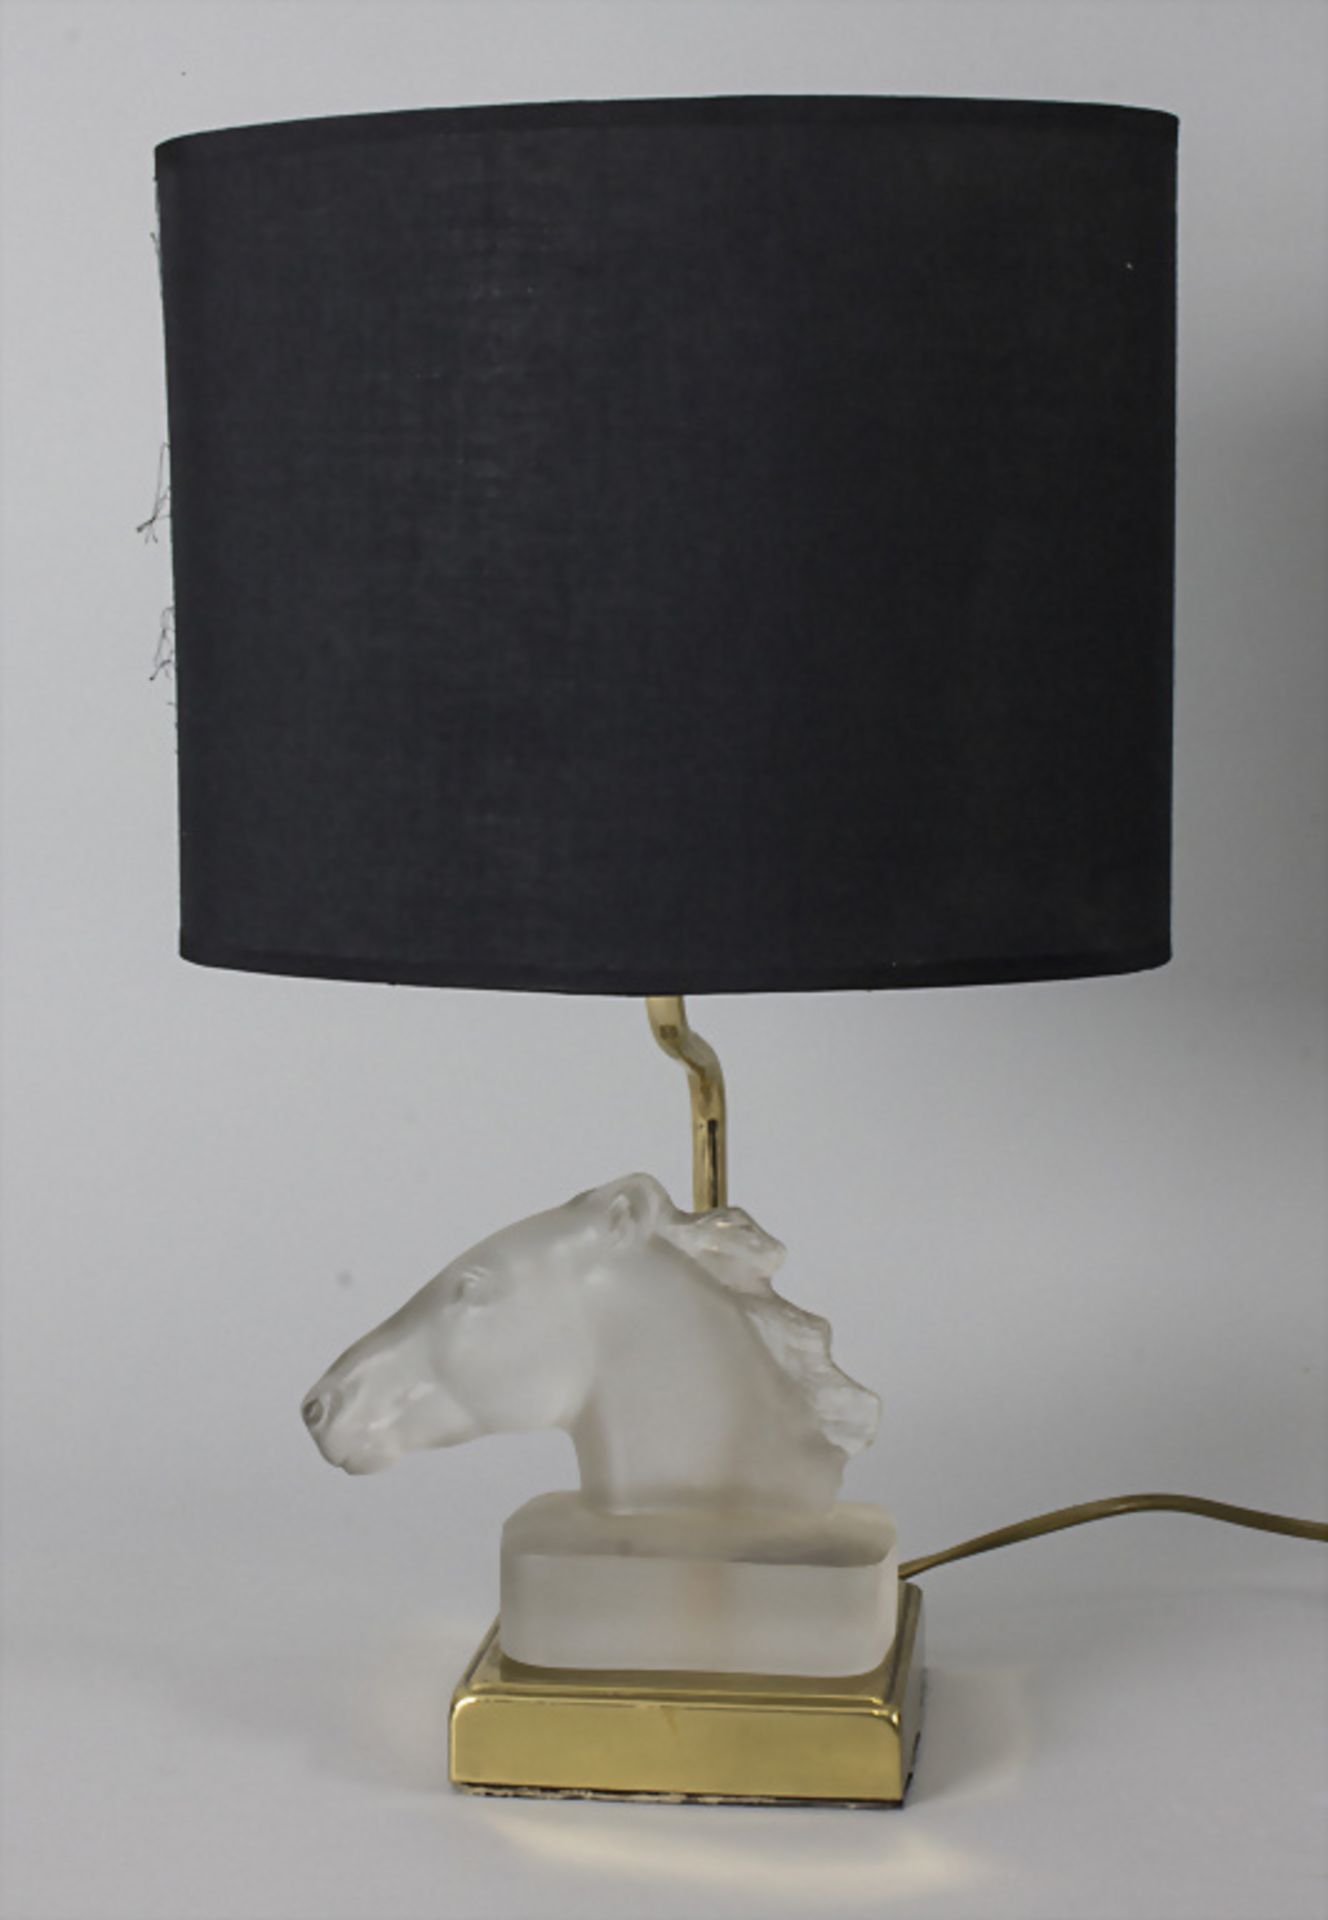 Tischlampe mit Pferdekopf / A table lamp with the head of a horse, Le Dauphin, Paris